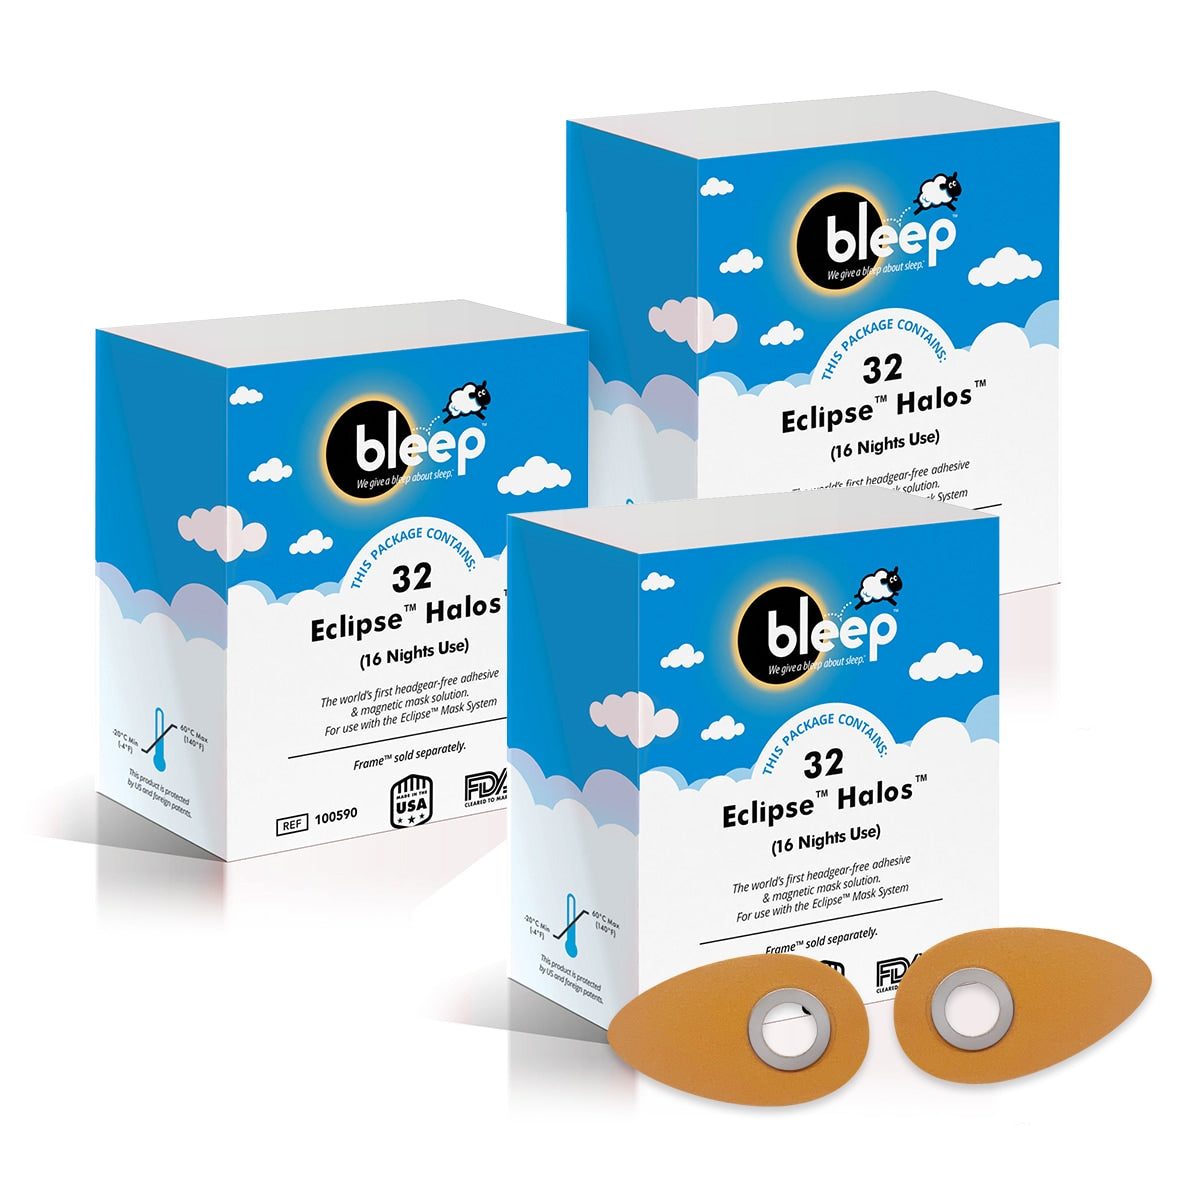 Bleep Eclipse Halos Adhesive Patches for Eclipse CPAP/BiPAP Masks